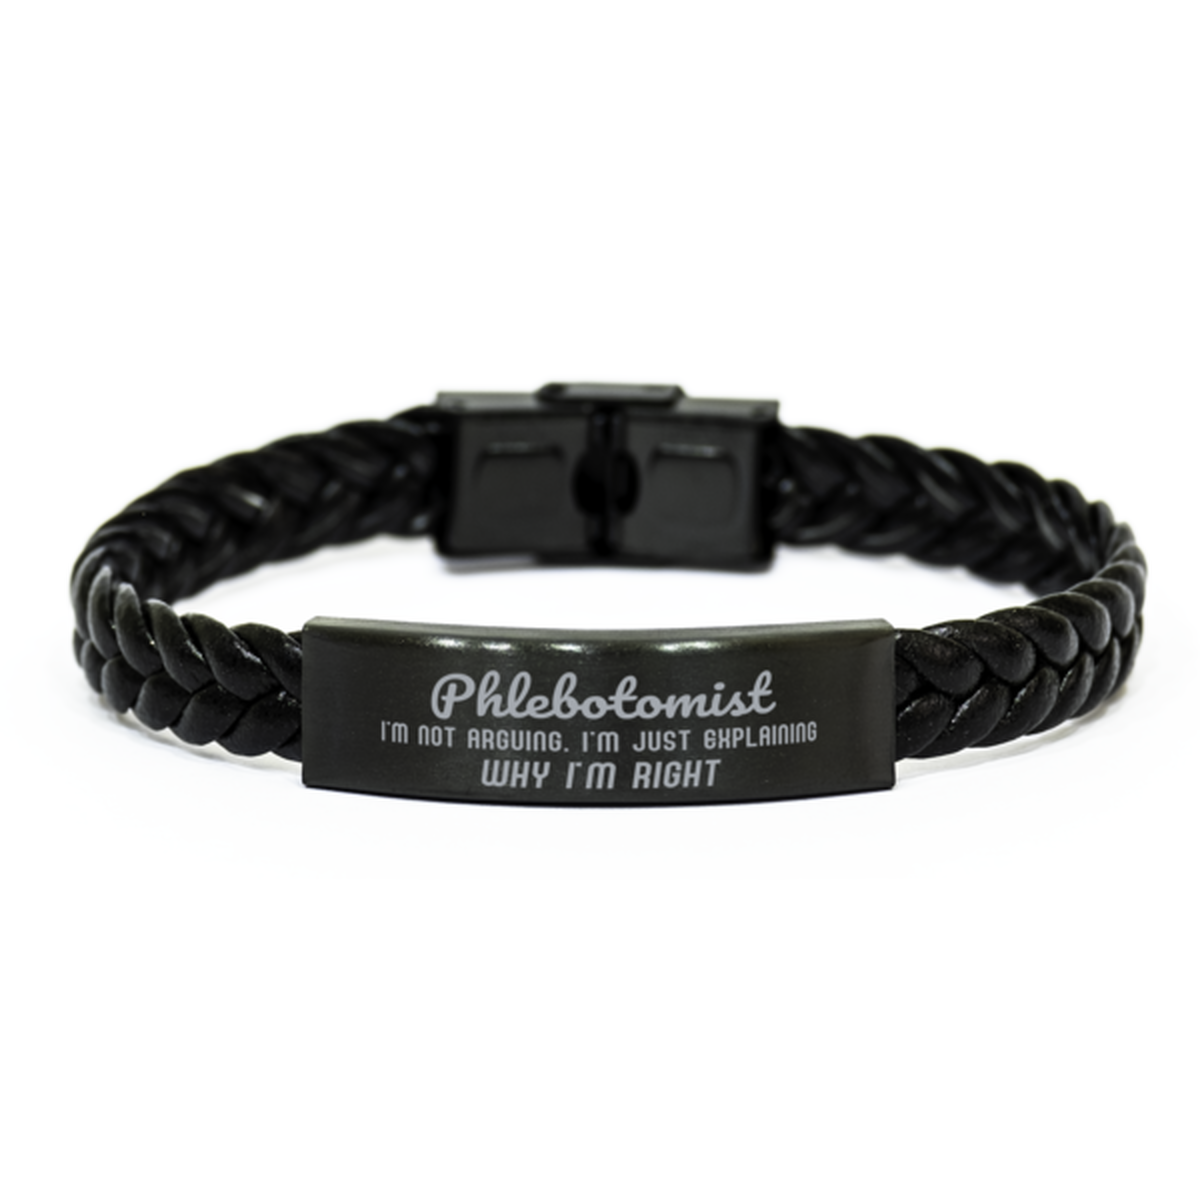 Phlebotomist I'm not Arguing. I'm Just Explaining Why I'm RIGHT Braided Leather Bracelet, Graduation Birthday Christmas Phlebotomist Gifts For Phlebotomist Funny Saying Quote Present for Men Women Coworker